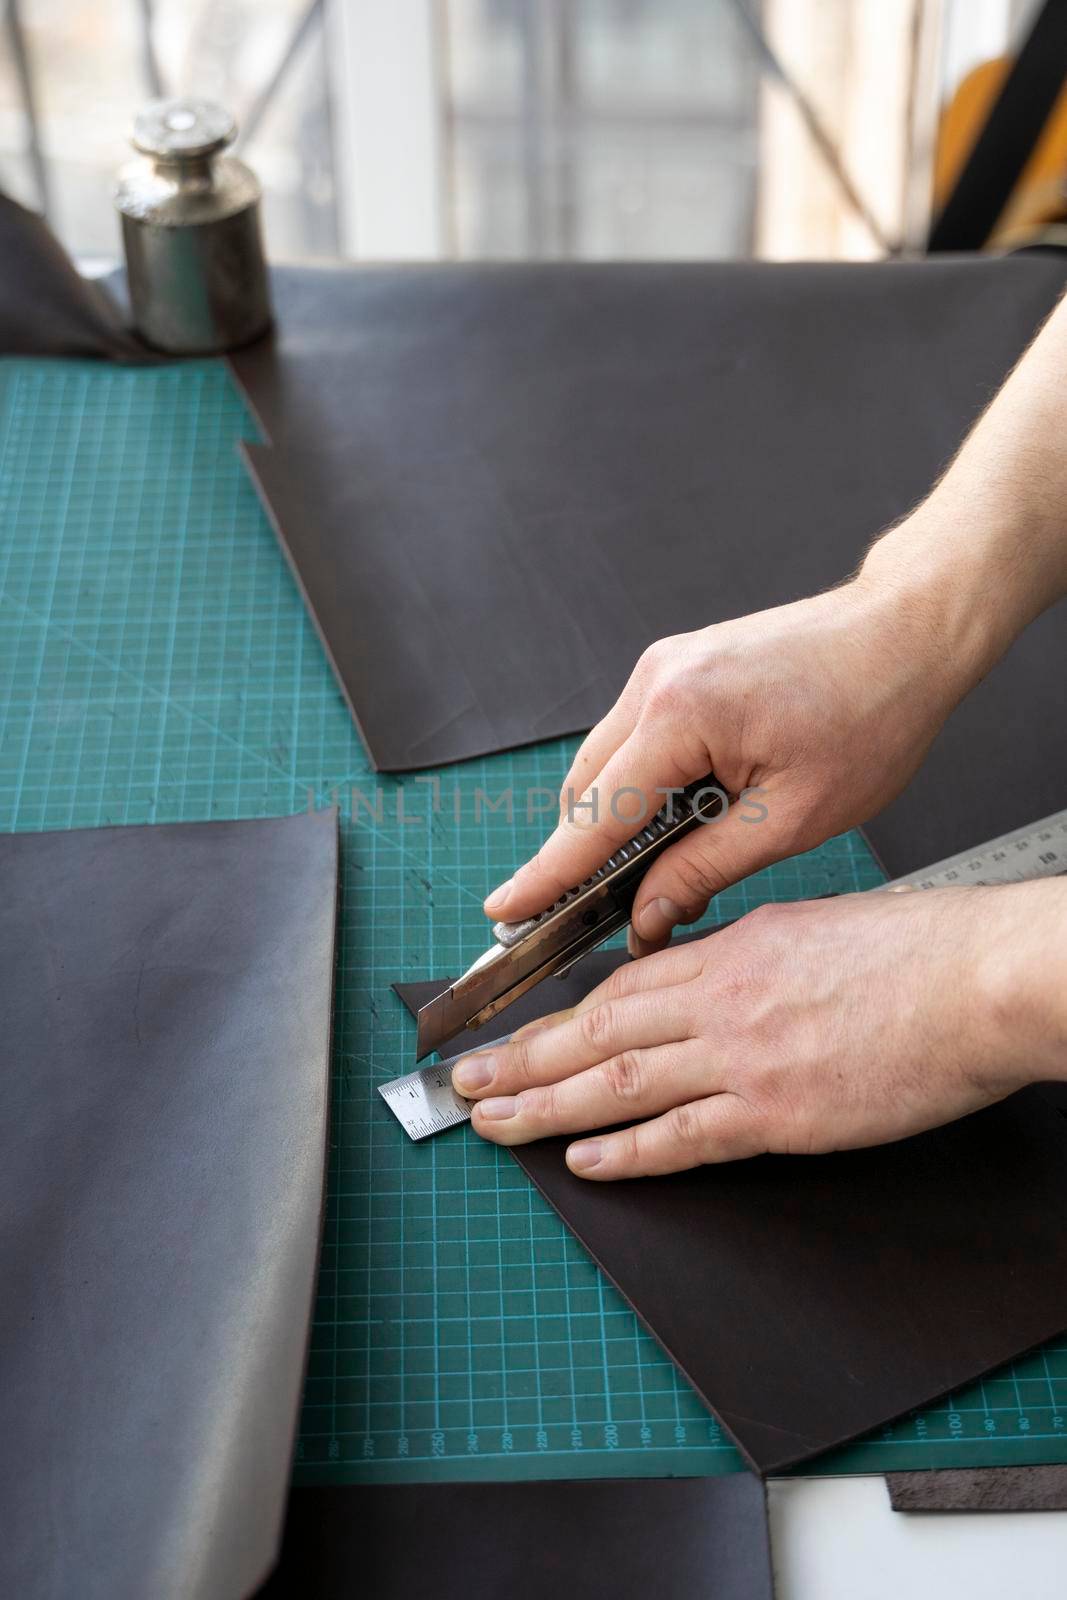 Men's hand holding a stationery knife and metal ruler and cutting on a pieces for a leather wallet in his workshop. Working process with a brown natural leather. Craftsman holding a crafting tools. by vovsht